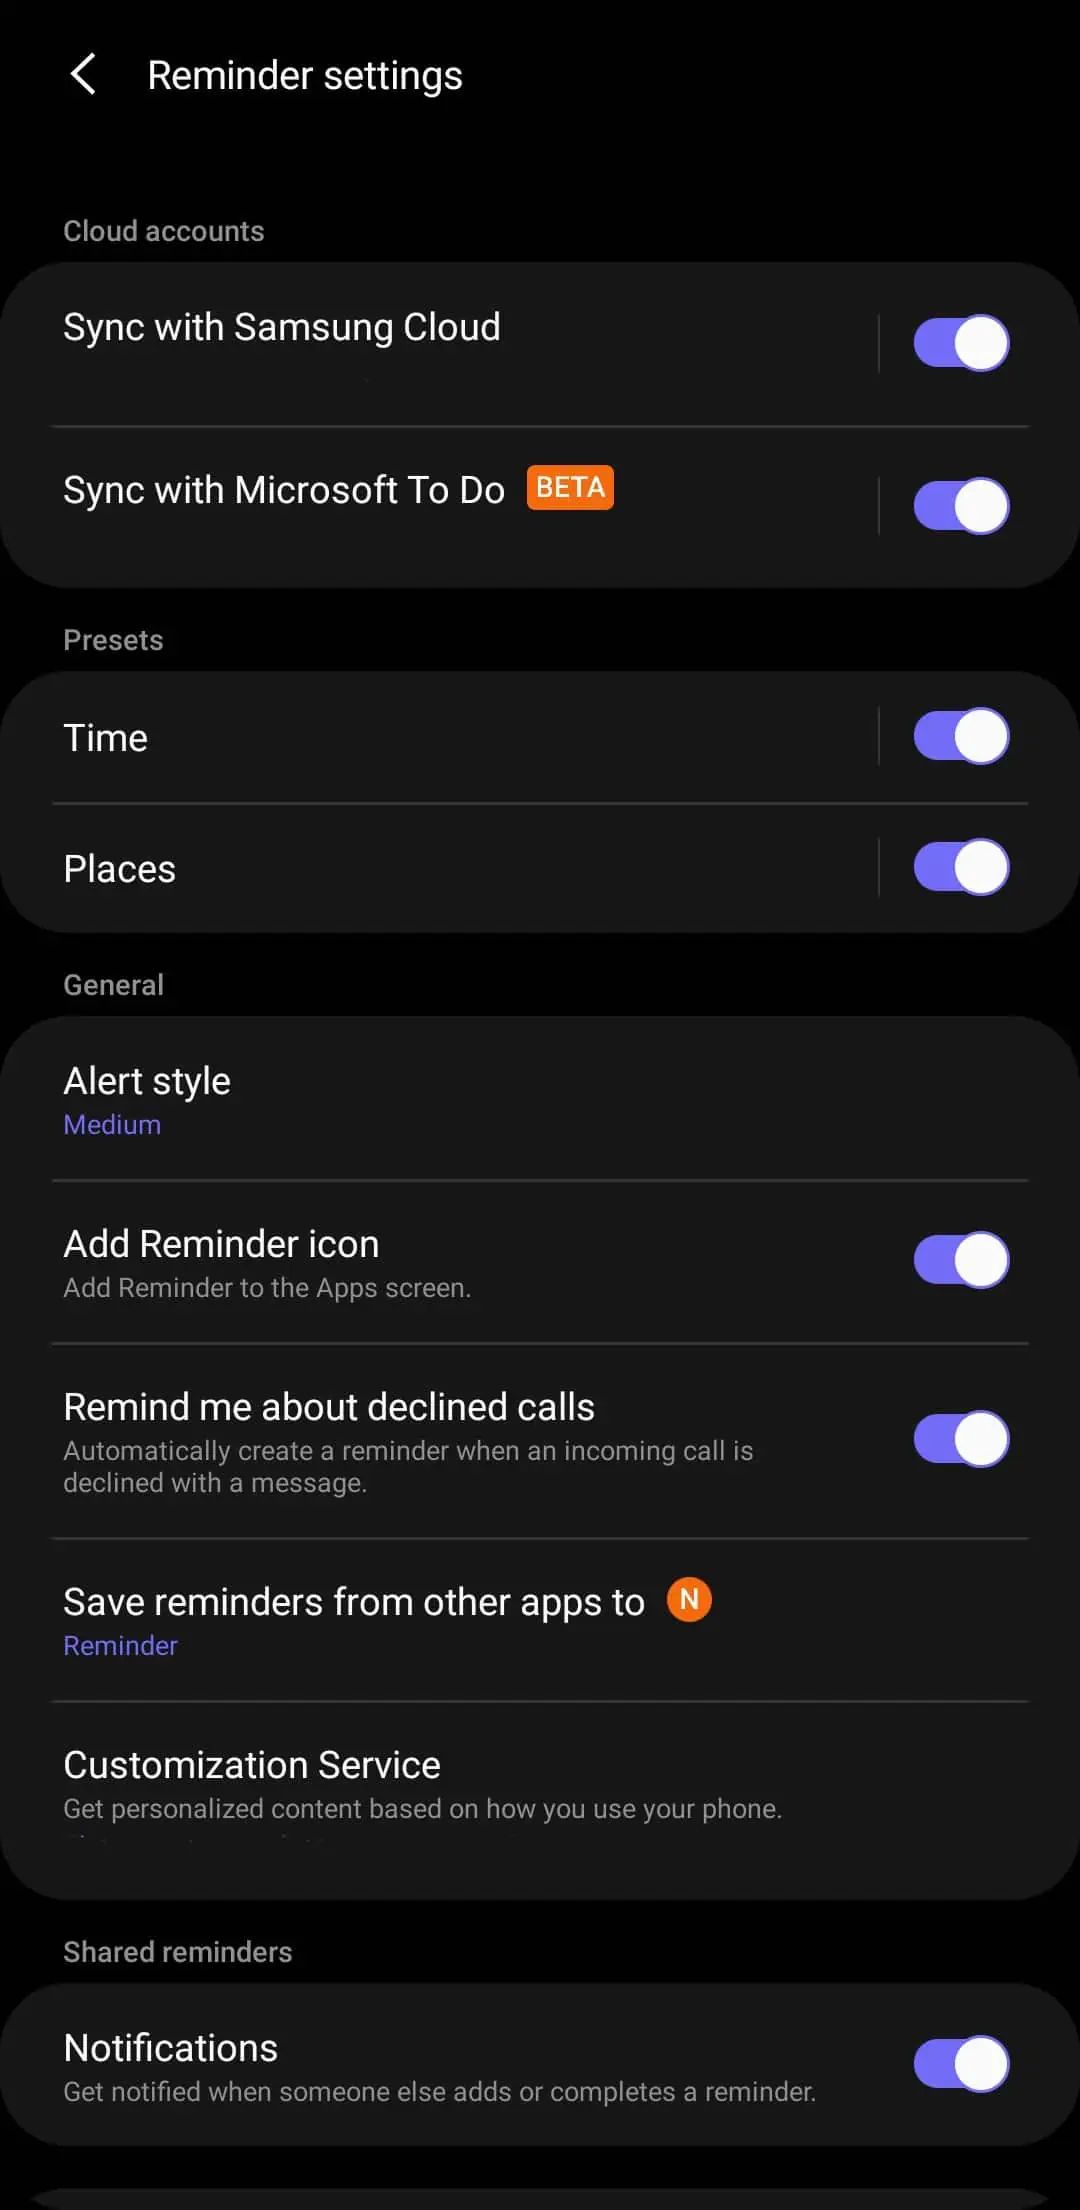 Samsung Reminders start syncing with Microsoft To Do MSPoweruser